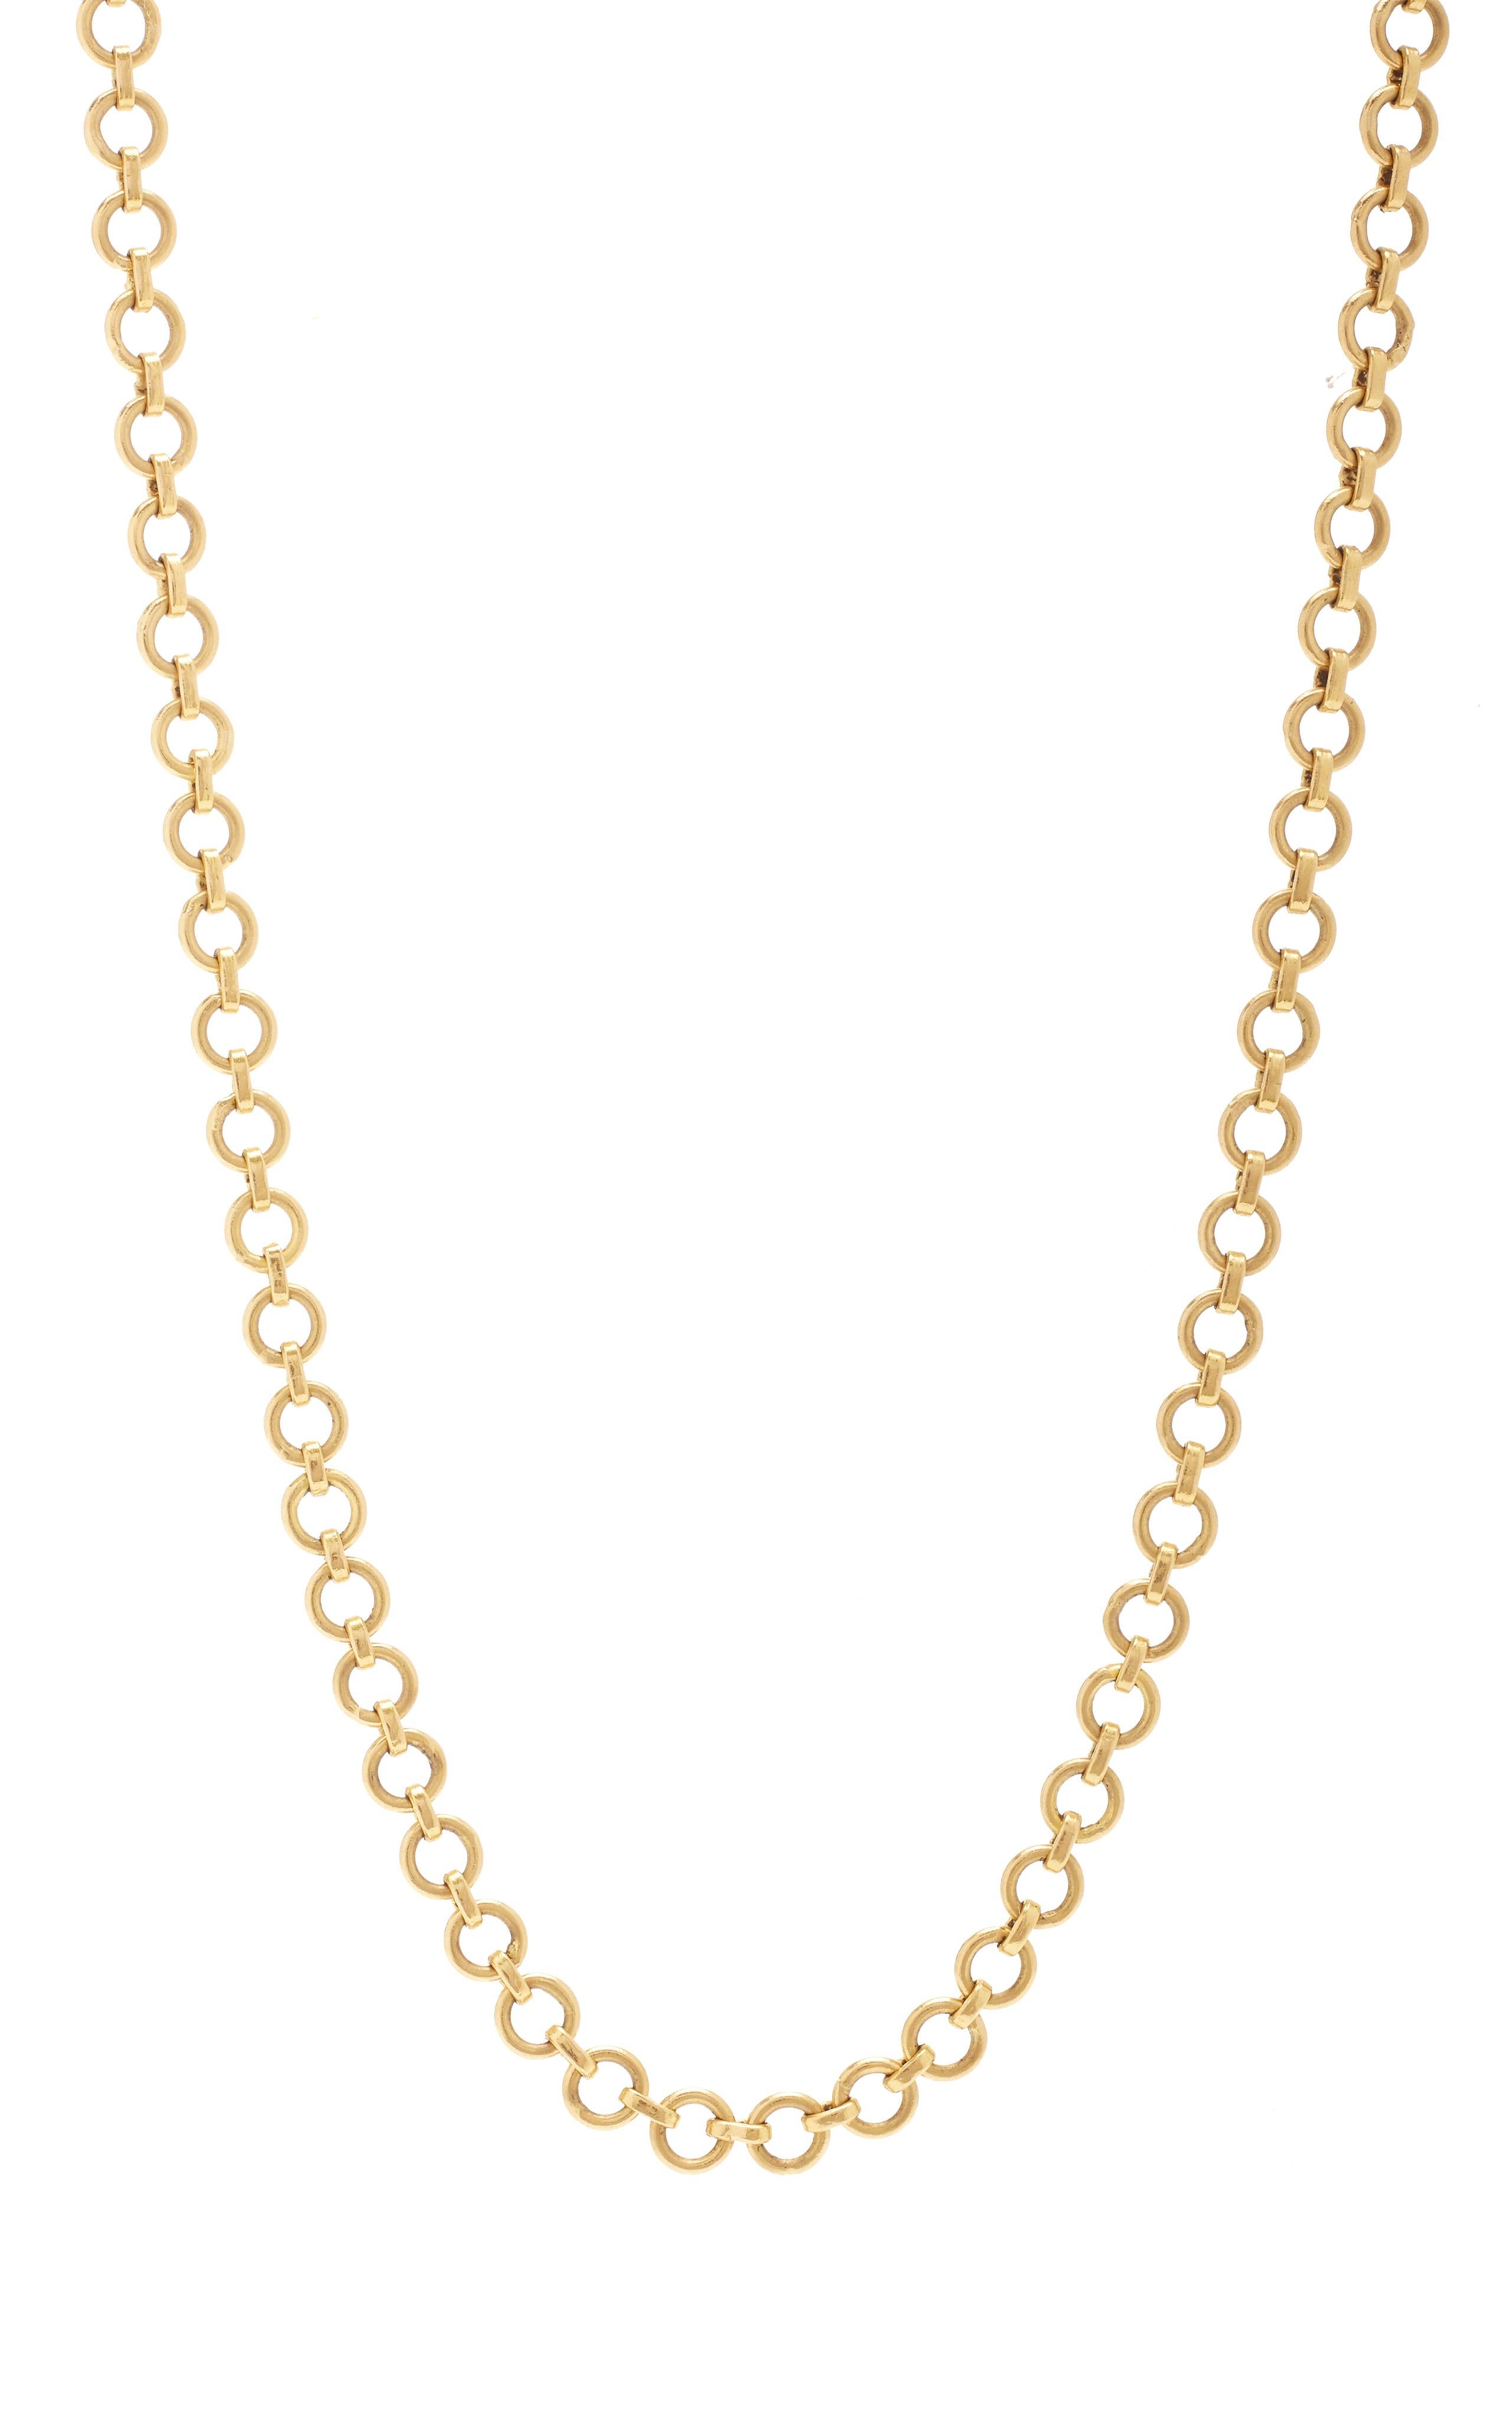 Ouroboros handmade gold, 18 karat gold chain that is designed to look like snakeskin. The standard length is 36